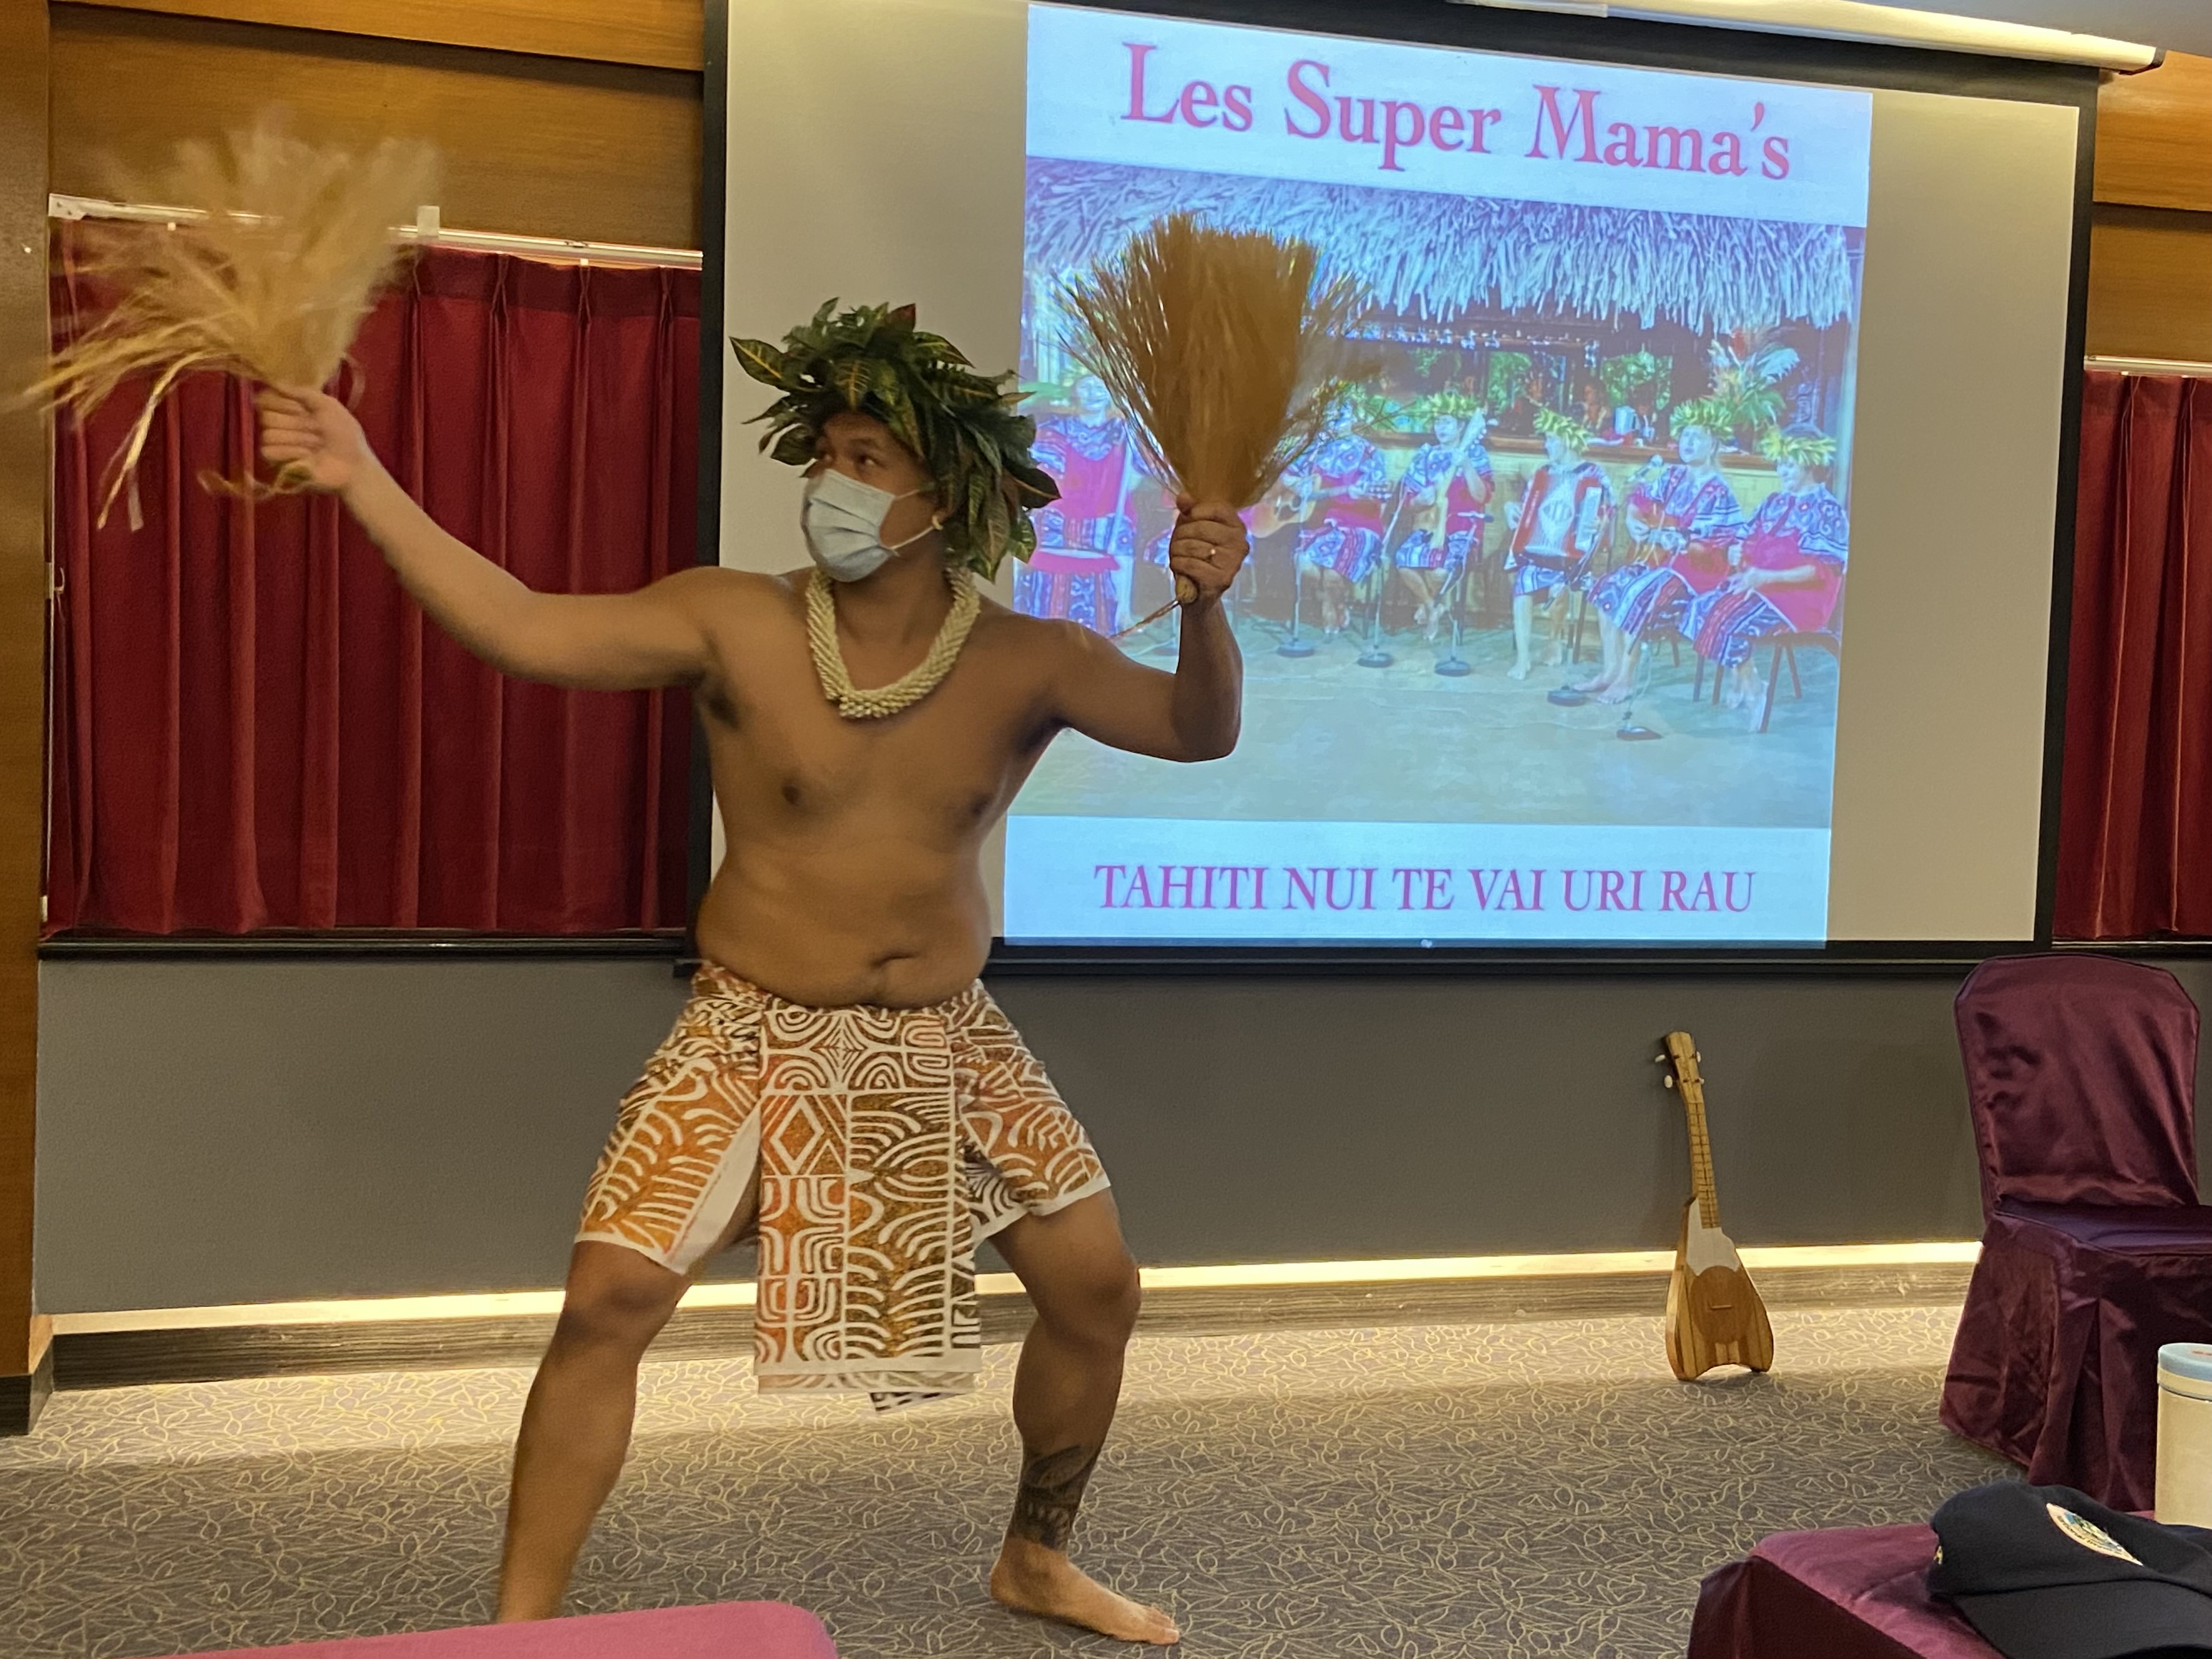 National Immigration Agency (Nantou County Service Center) invites Tahitian to share his cultures and experience in adjusting himself to an international marriage. (Photo / Provided by National Immigration Agency, Nantou County Service Center)